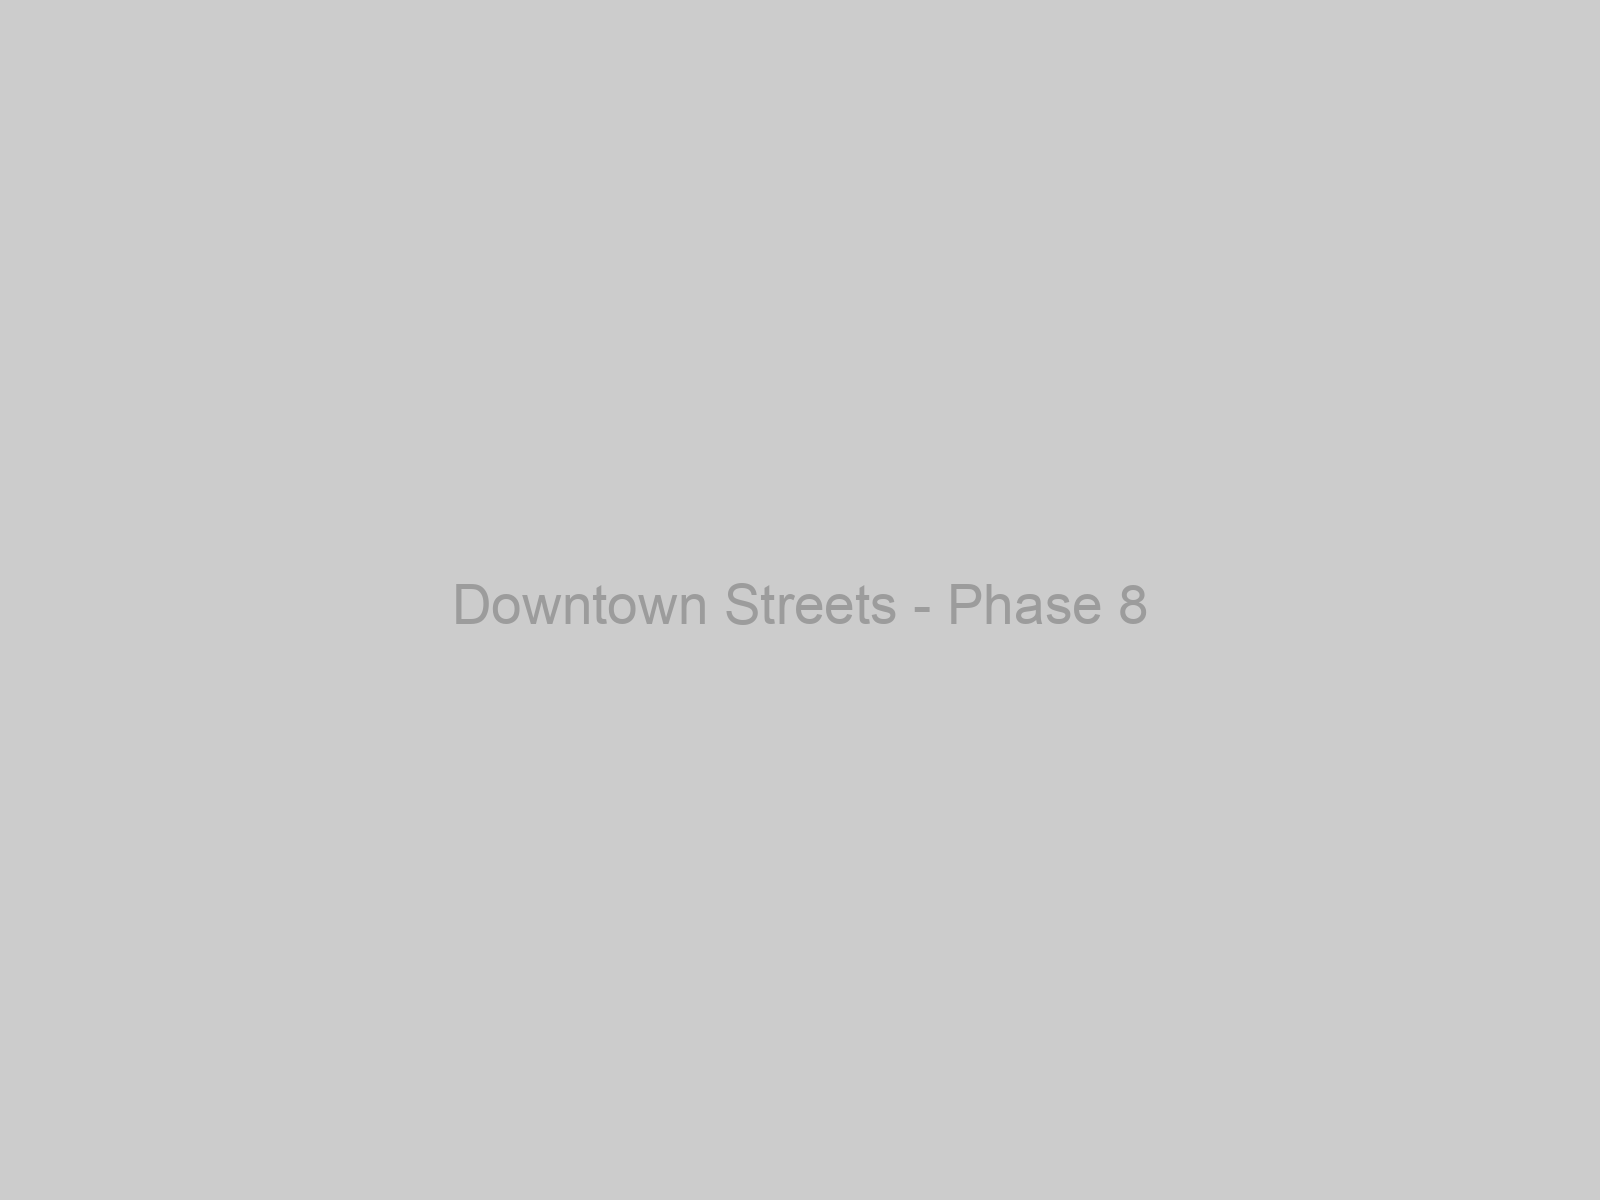 Downtown Streets - Phase 8